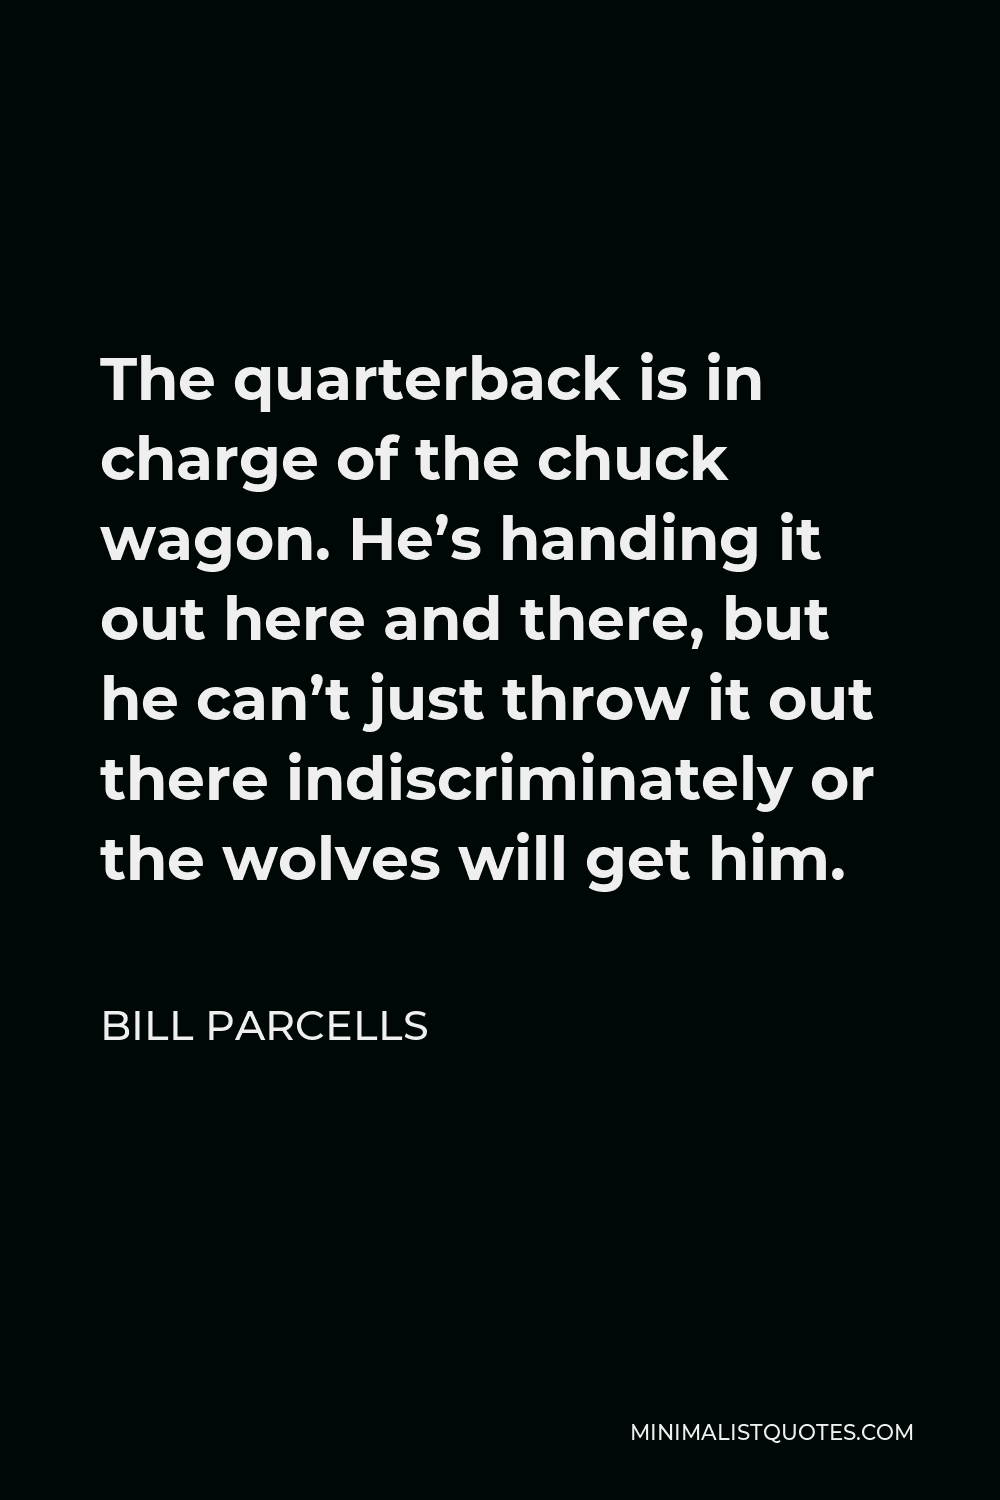 Bill Parcells Quote - The quarterback is in charge of the chuck wagon. He’s handing it out here and there, but he can’t just throw it out there indiscriminately or the wolves will get him.